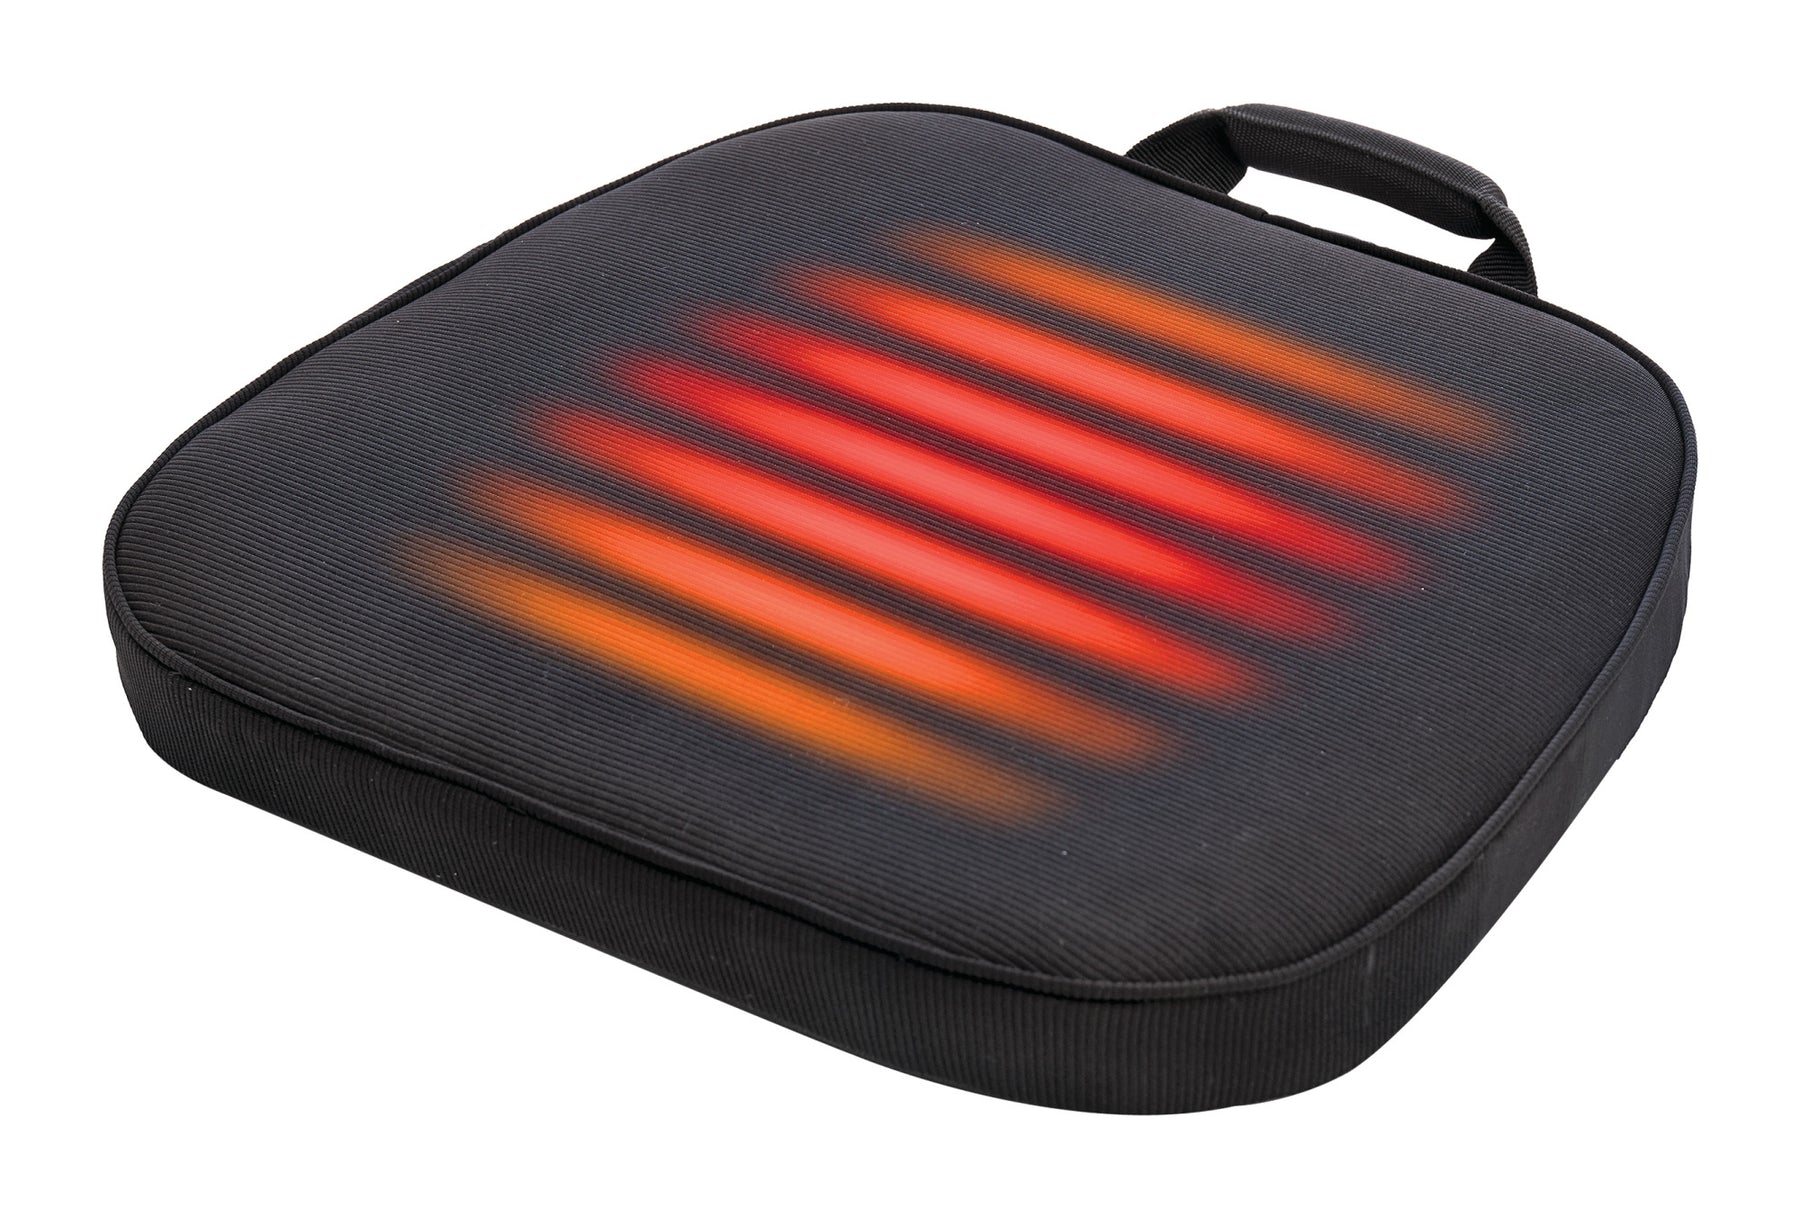 AutoTrends USB Heated Cushion with Memory Foam